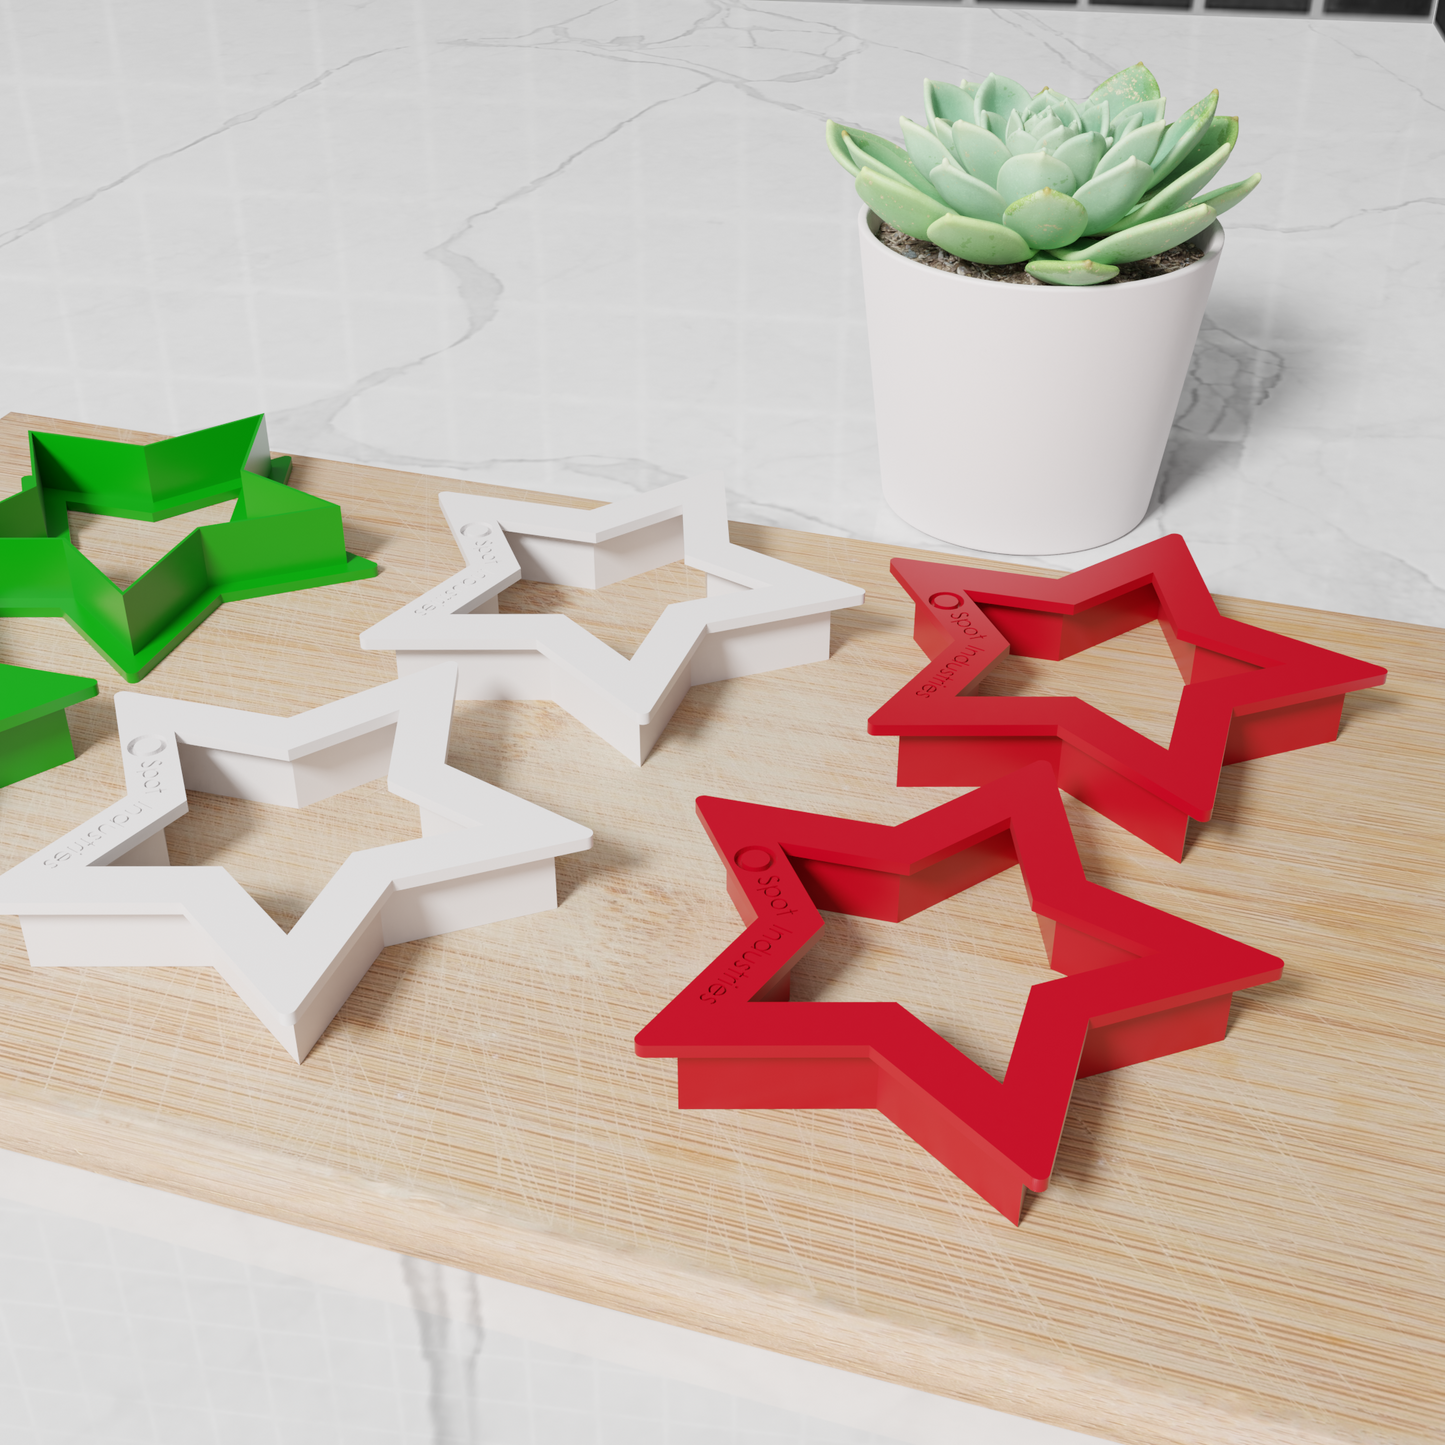 Star Shape Cookie Cutter Set For Kids & Adults! Custom Sizes, Multiple Colors. Work As Clay Cutter And Fondant Cutter Too!